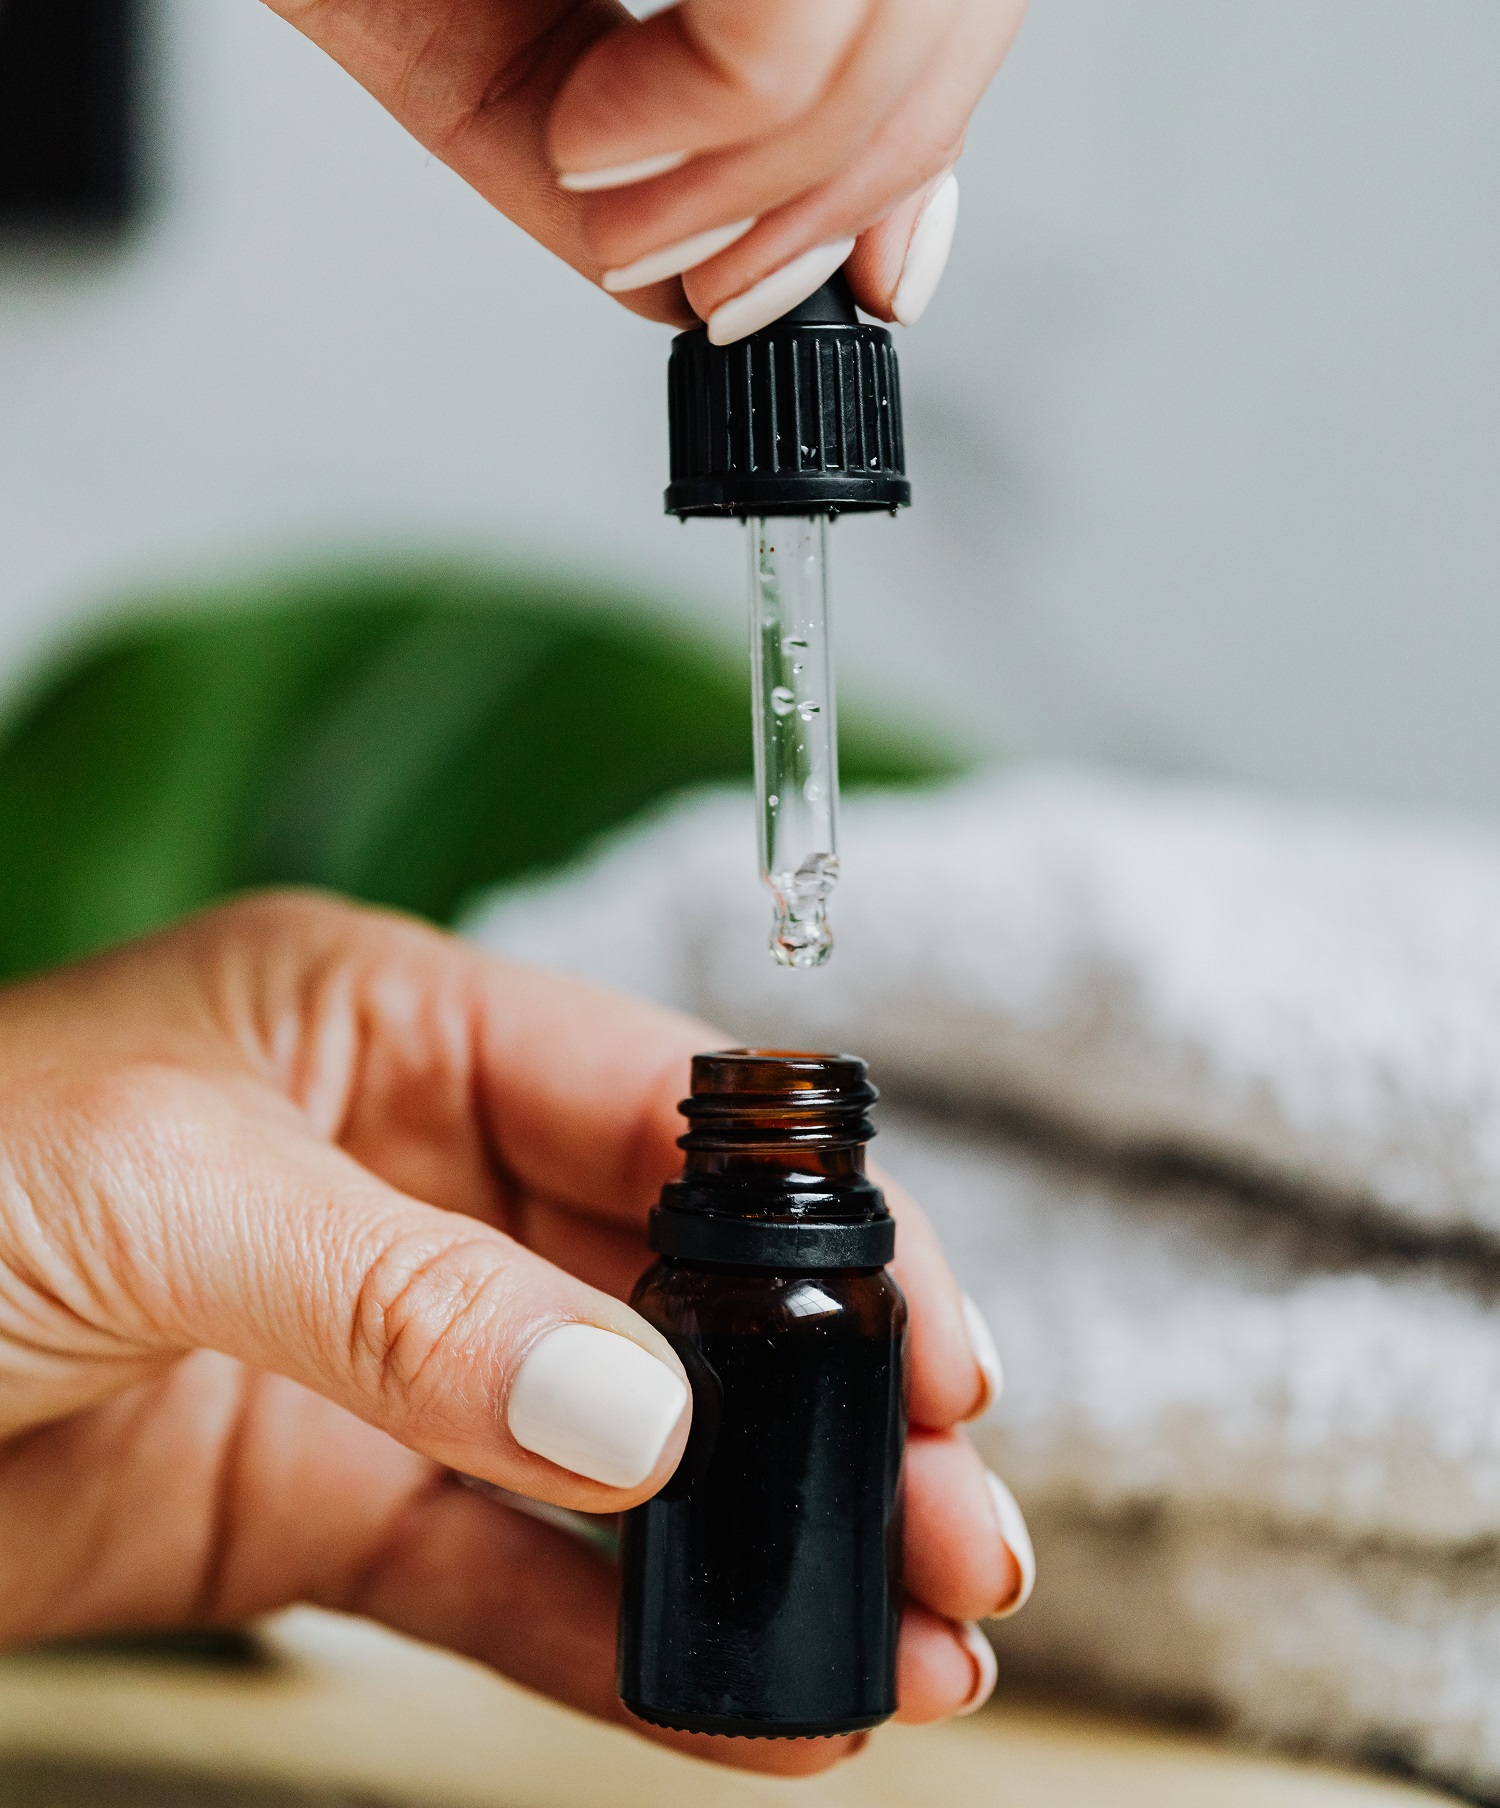 Why should you use a face serum? Check out what you need to know about this product